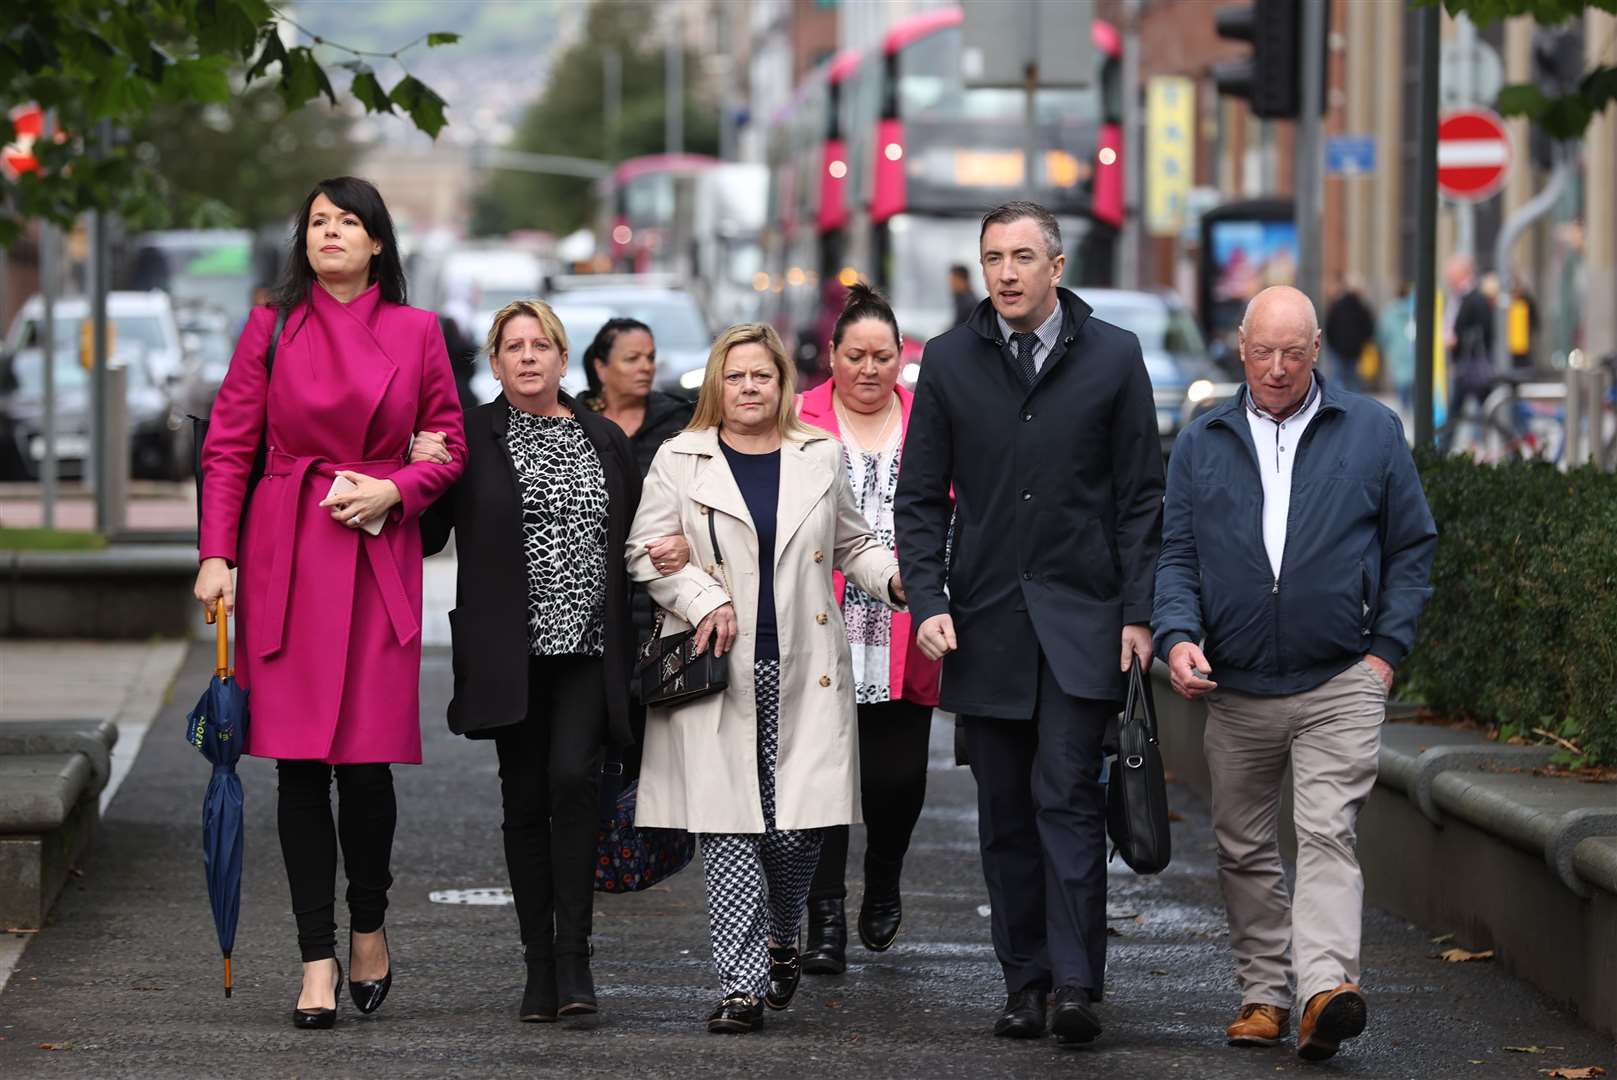 (left to right) Grainne Teggart, deputy director of Amnesty International in Northern Ireland, with Martina Dillon, wife of Seamus Dillon, (unknown), sisters Lynda and Isobel McManus, daughter’s James McManus, Gavin Booth of Phoenix Law, and Peter McCarthy walking to the Royal Courts of Justice (Liam McBurney/PA)